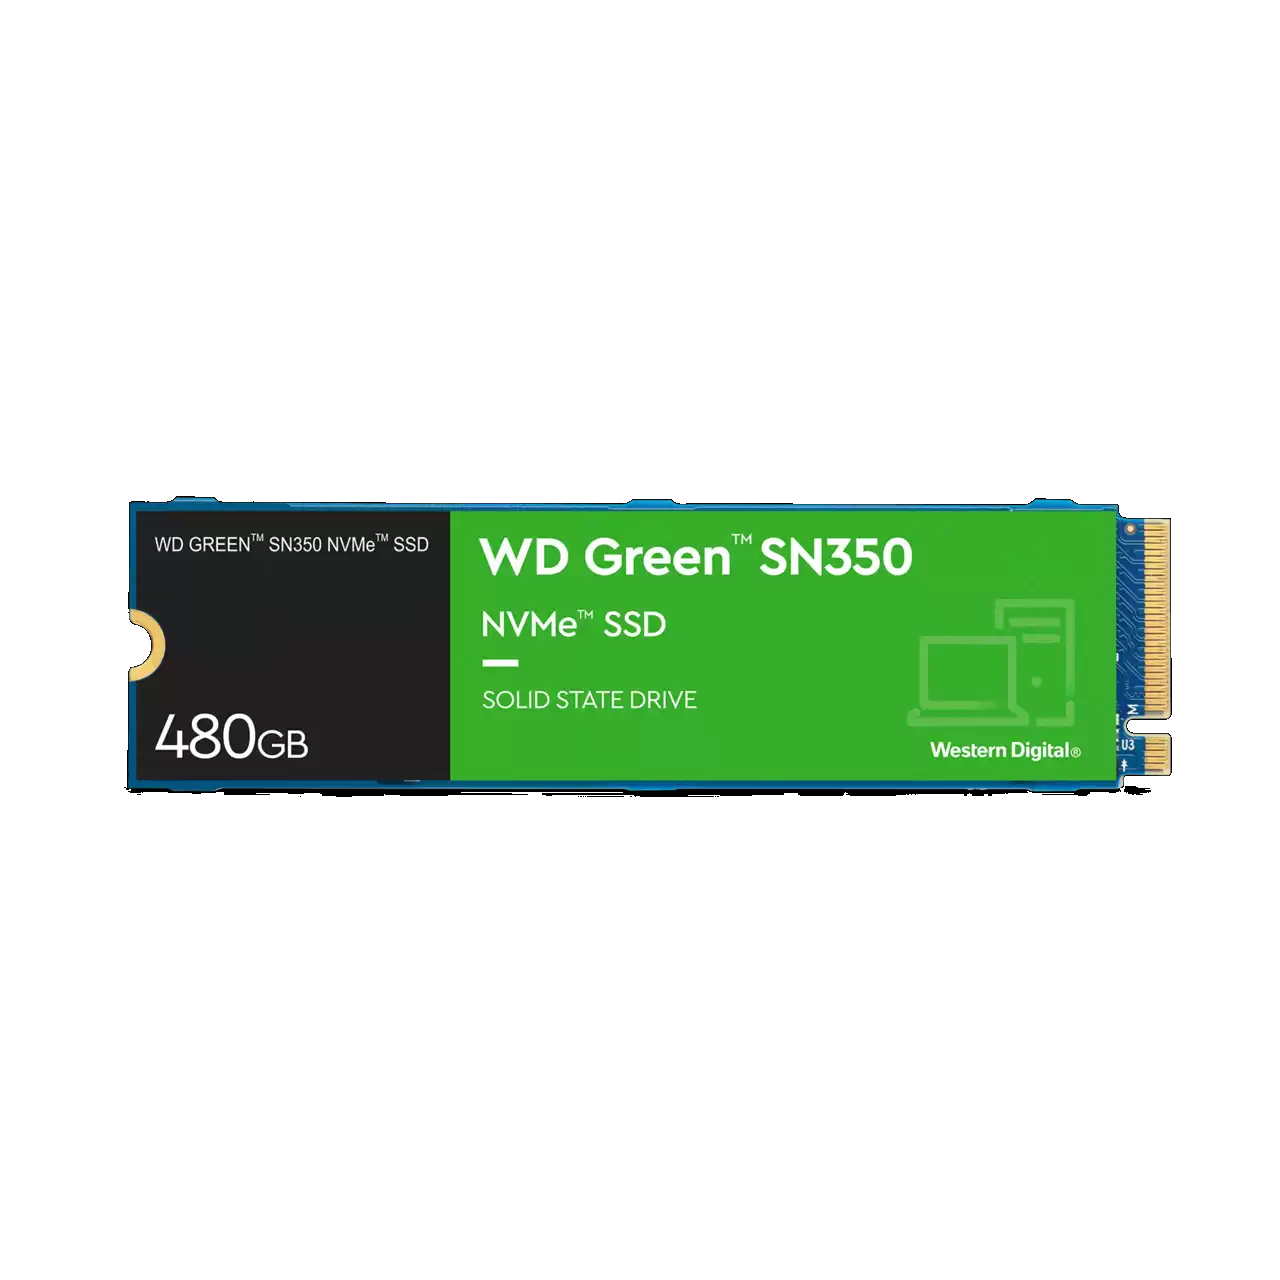 Western Digital WD Green SN350 M.2 2280 NVMe PCIe SSD Solid State Drives